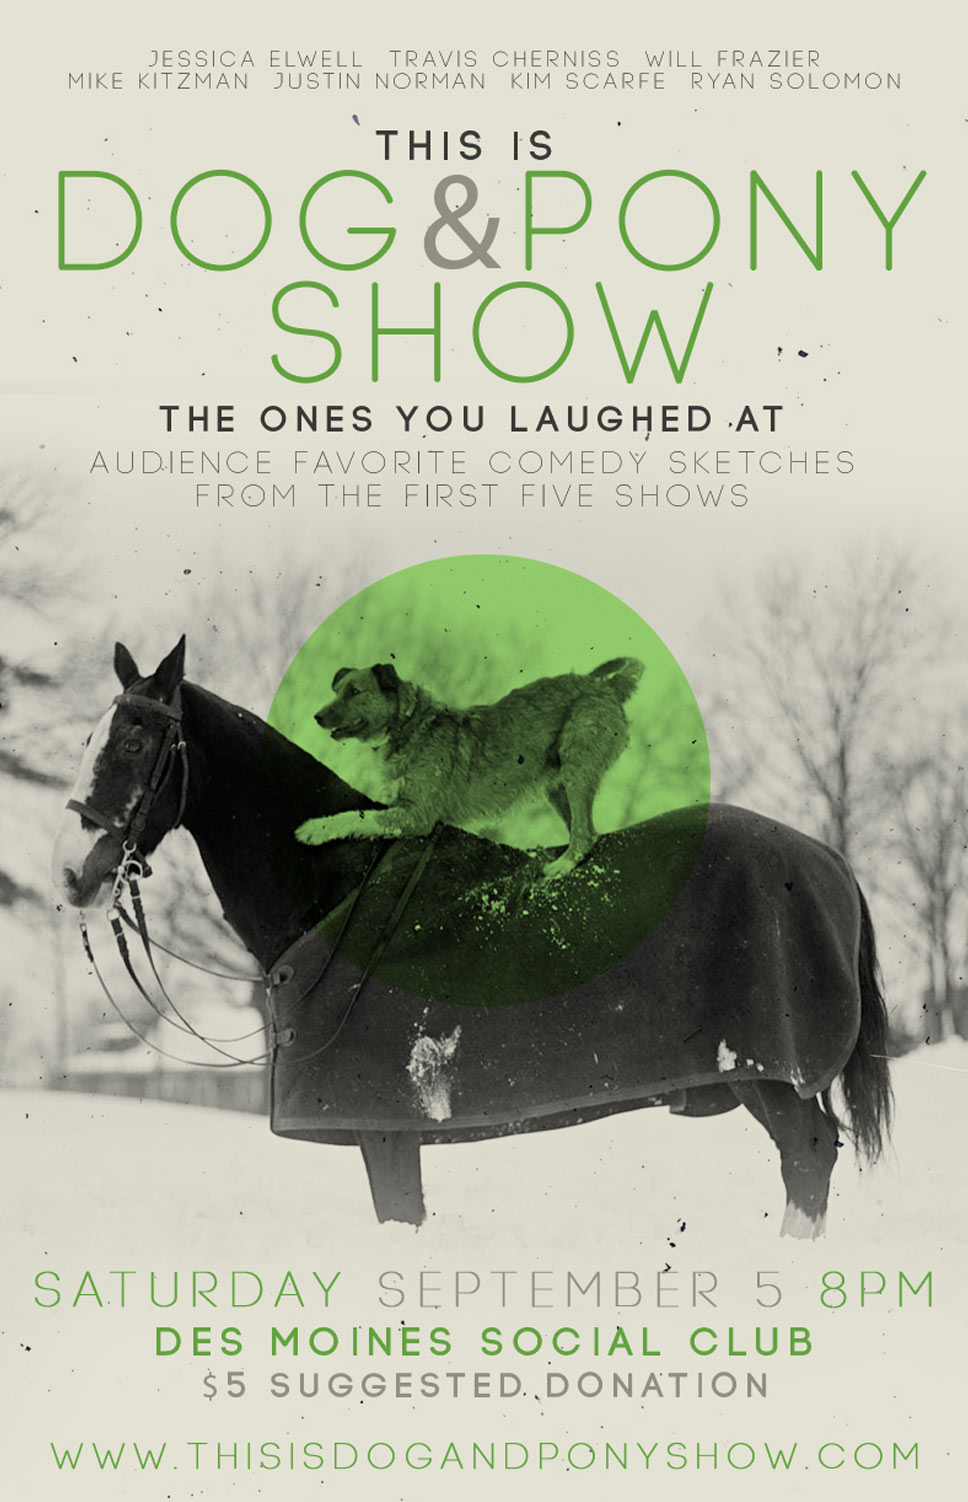 Dog & Pony Show 4: The Ones You Laughed At